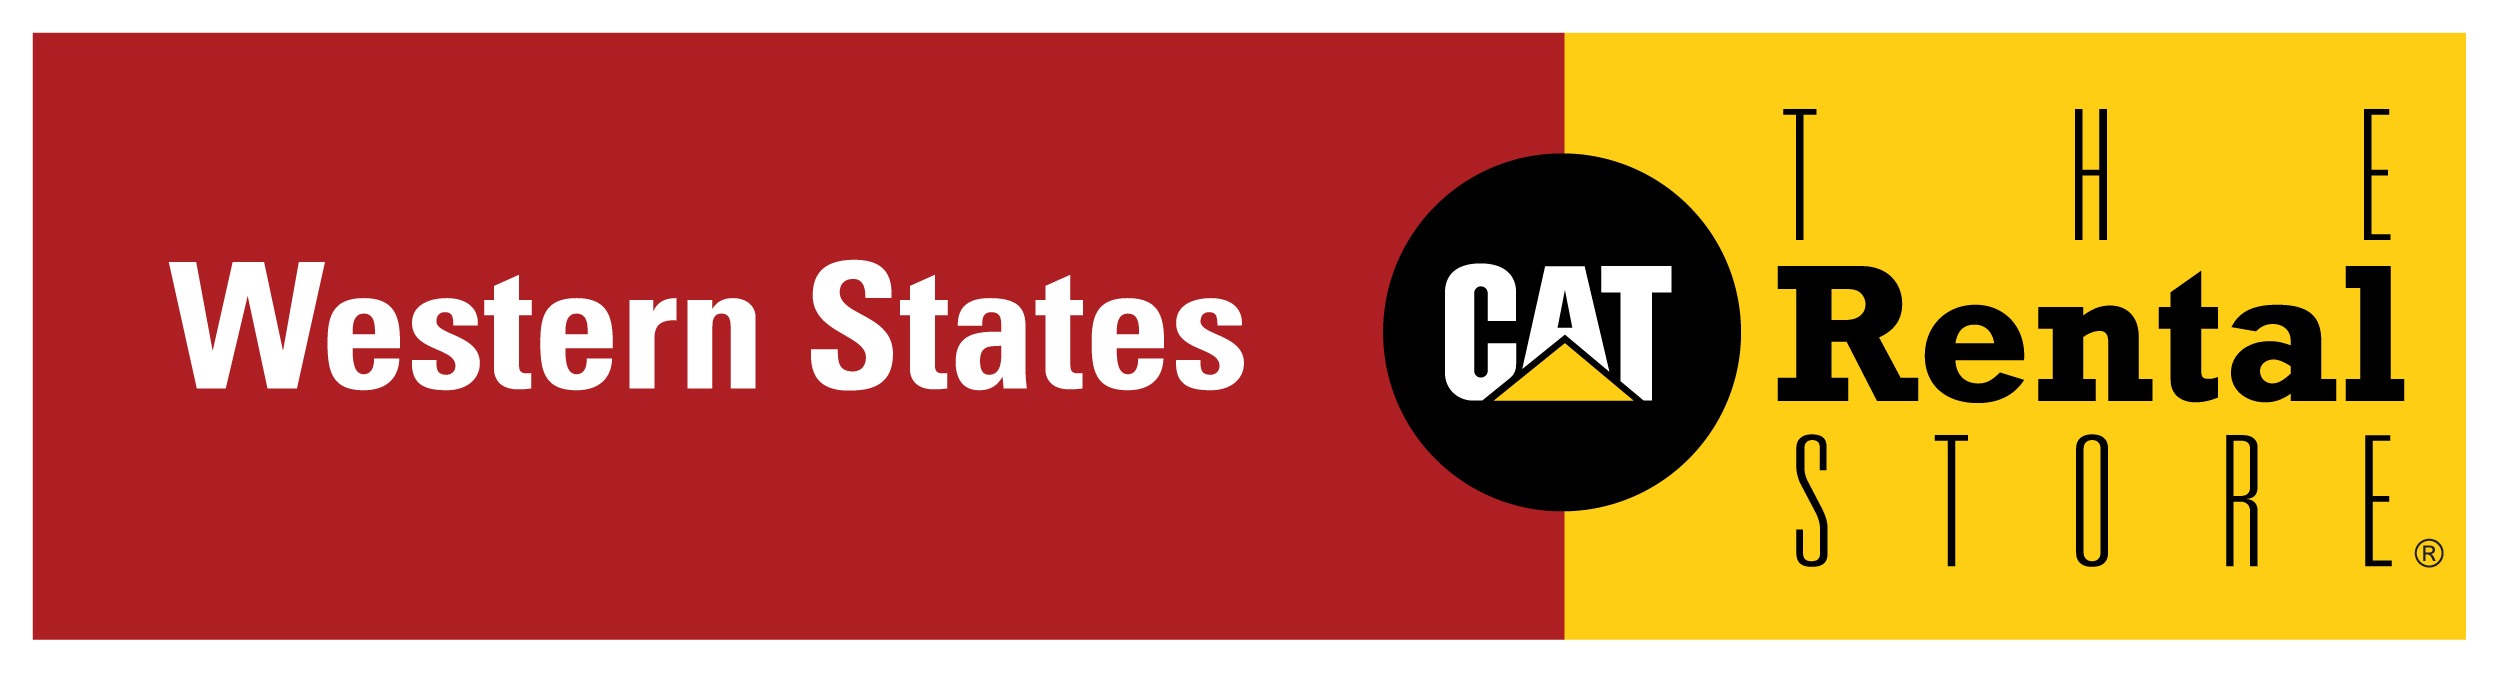 Cat Rental Store | Aerial Lift and Earthmoving Equipment Rental